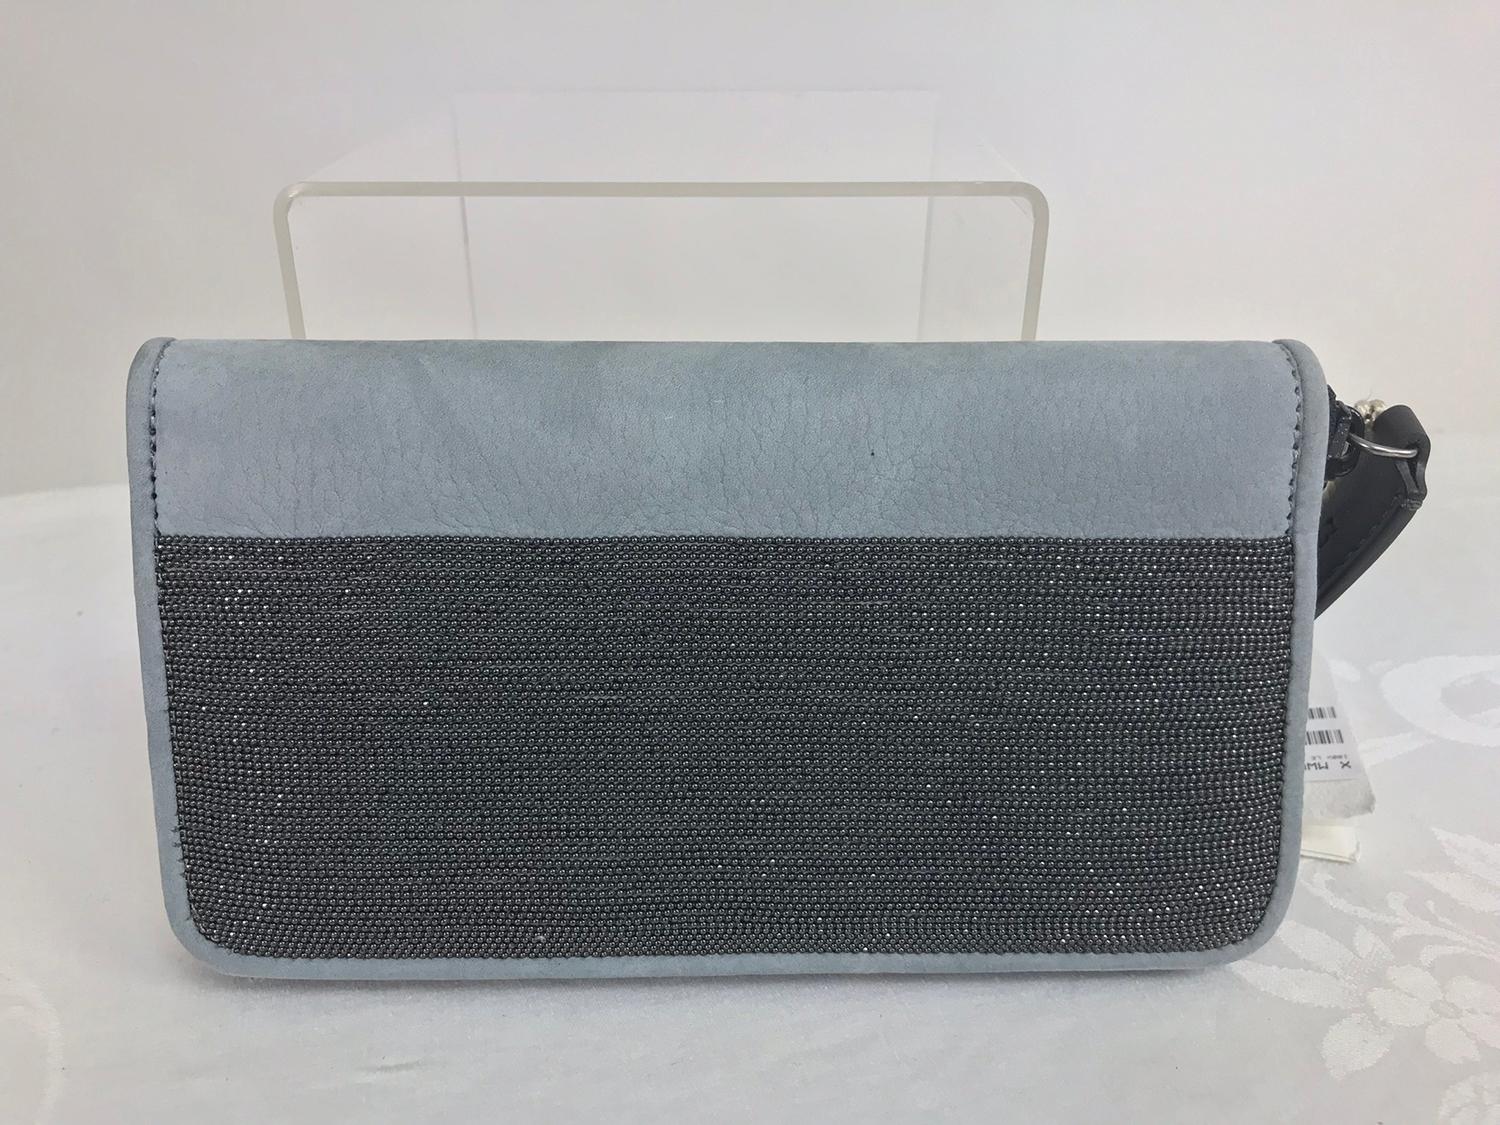 Brunello Cucinelli caviar beaded grey suede zipper clutch 2018 NWT retail $1695. From spring/summer 2018 this gorgeous clutch/wallet will hold all your credit cards and flat bills + an iPhone in style. Soft pale grey textured suede with tiny dark